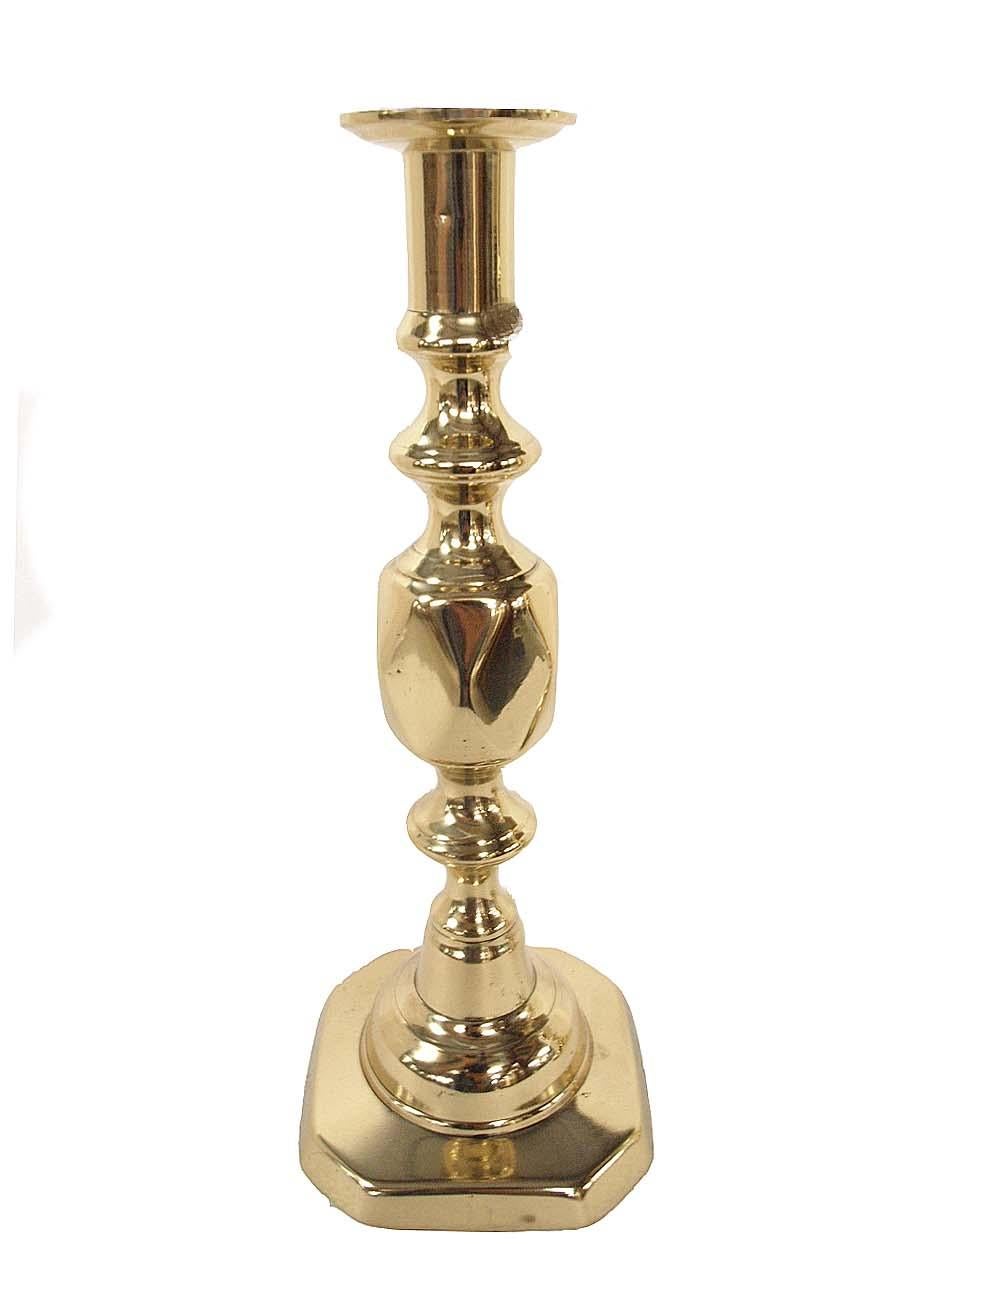 Pair of English brass ''Queen of Diamonds'' candlesticks, this pair are from the famous diamond candlestick series that have been collected for generations ( serious collectors hunt for and find the entire series) From smallest to largest they